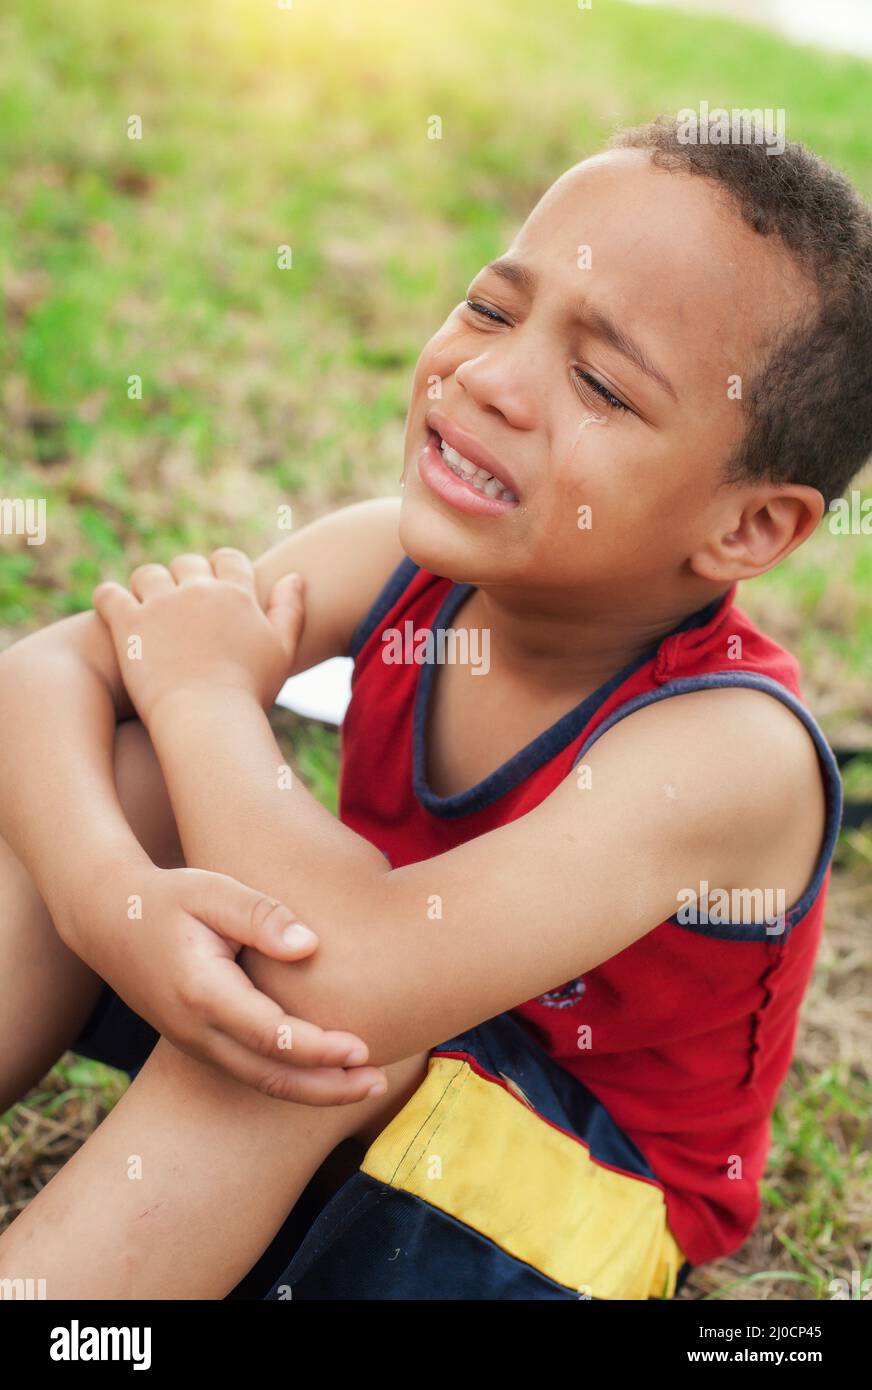 Portrait of little boy crying with tears on cheeks Stock Photo